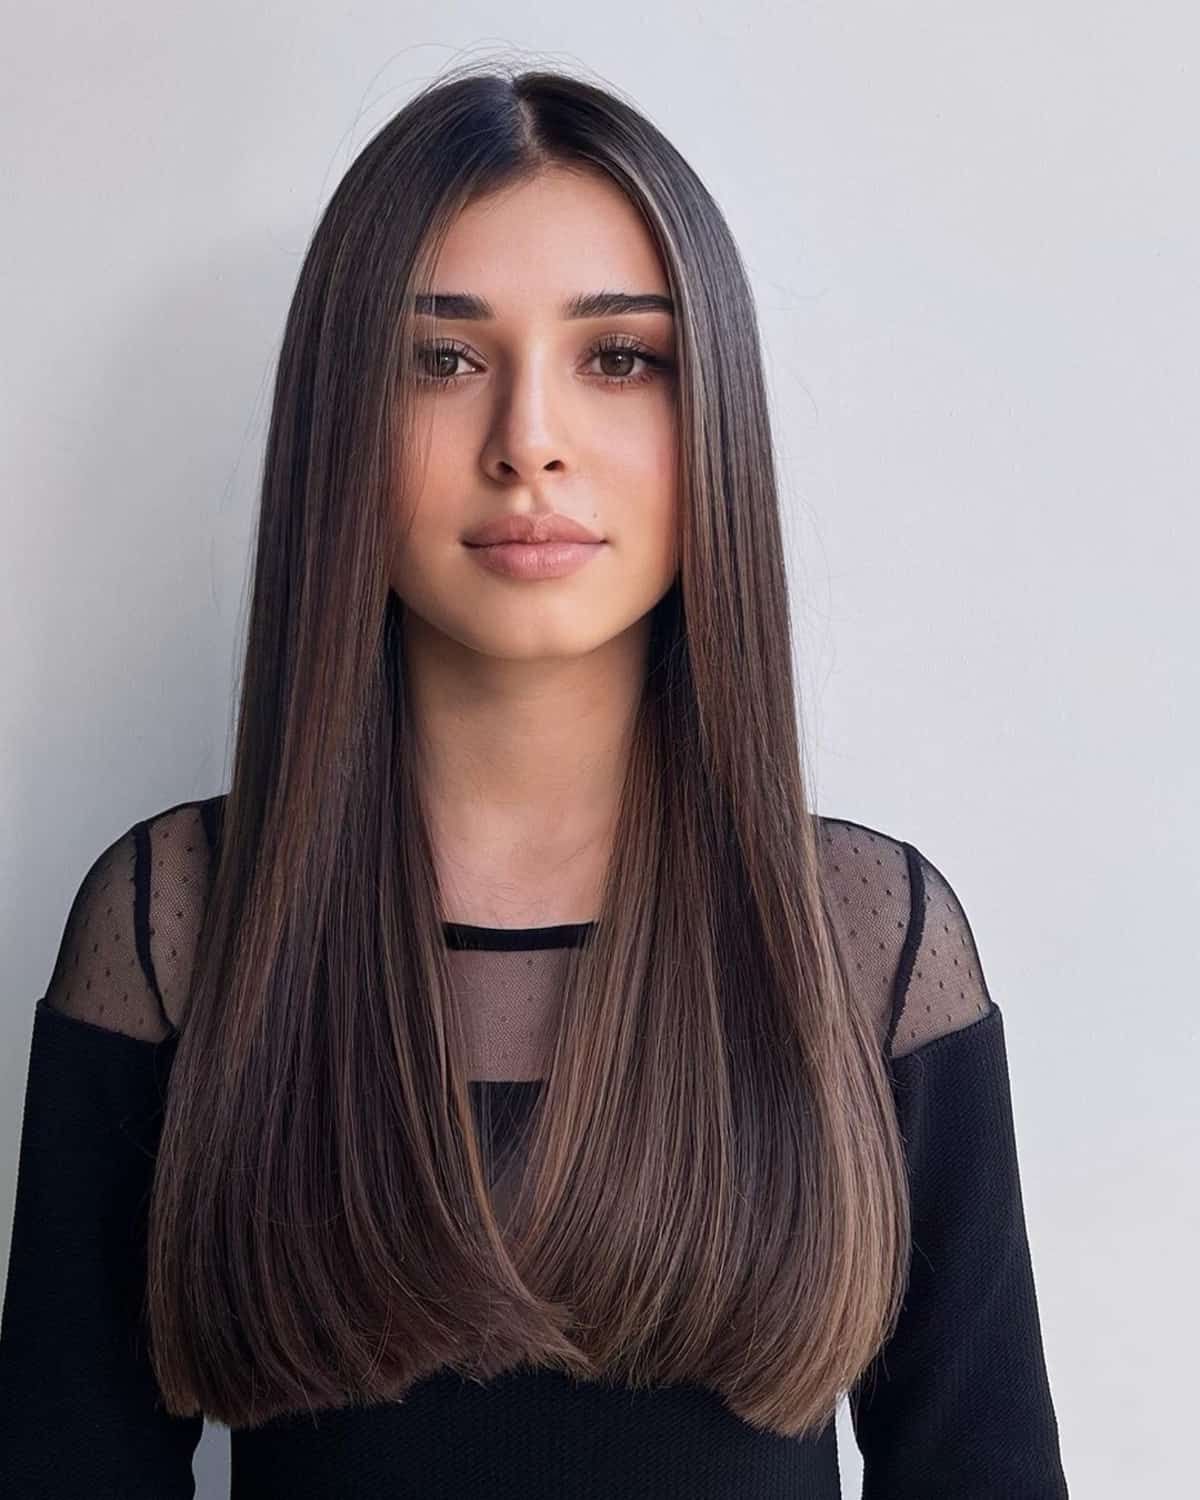 43 Flattering Middle Part Hairstyles Trending Right Now In Recent Middle Part Straight Haircuts (View 3 of 25)